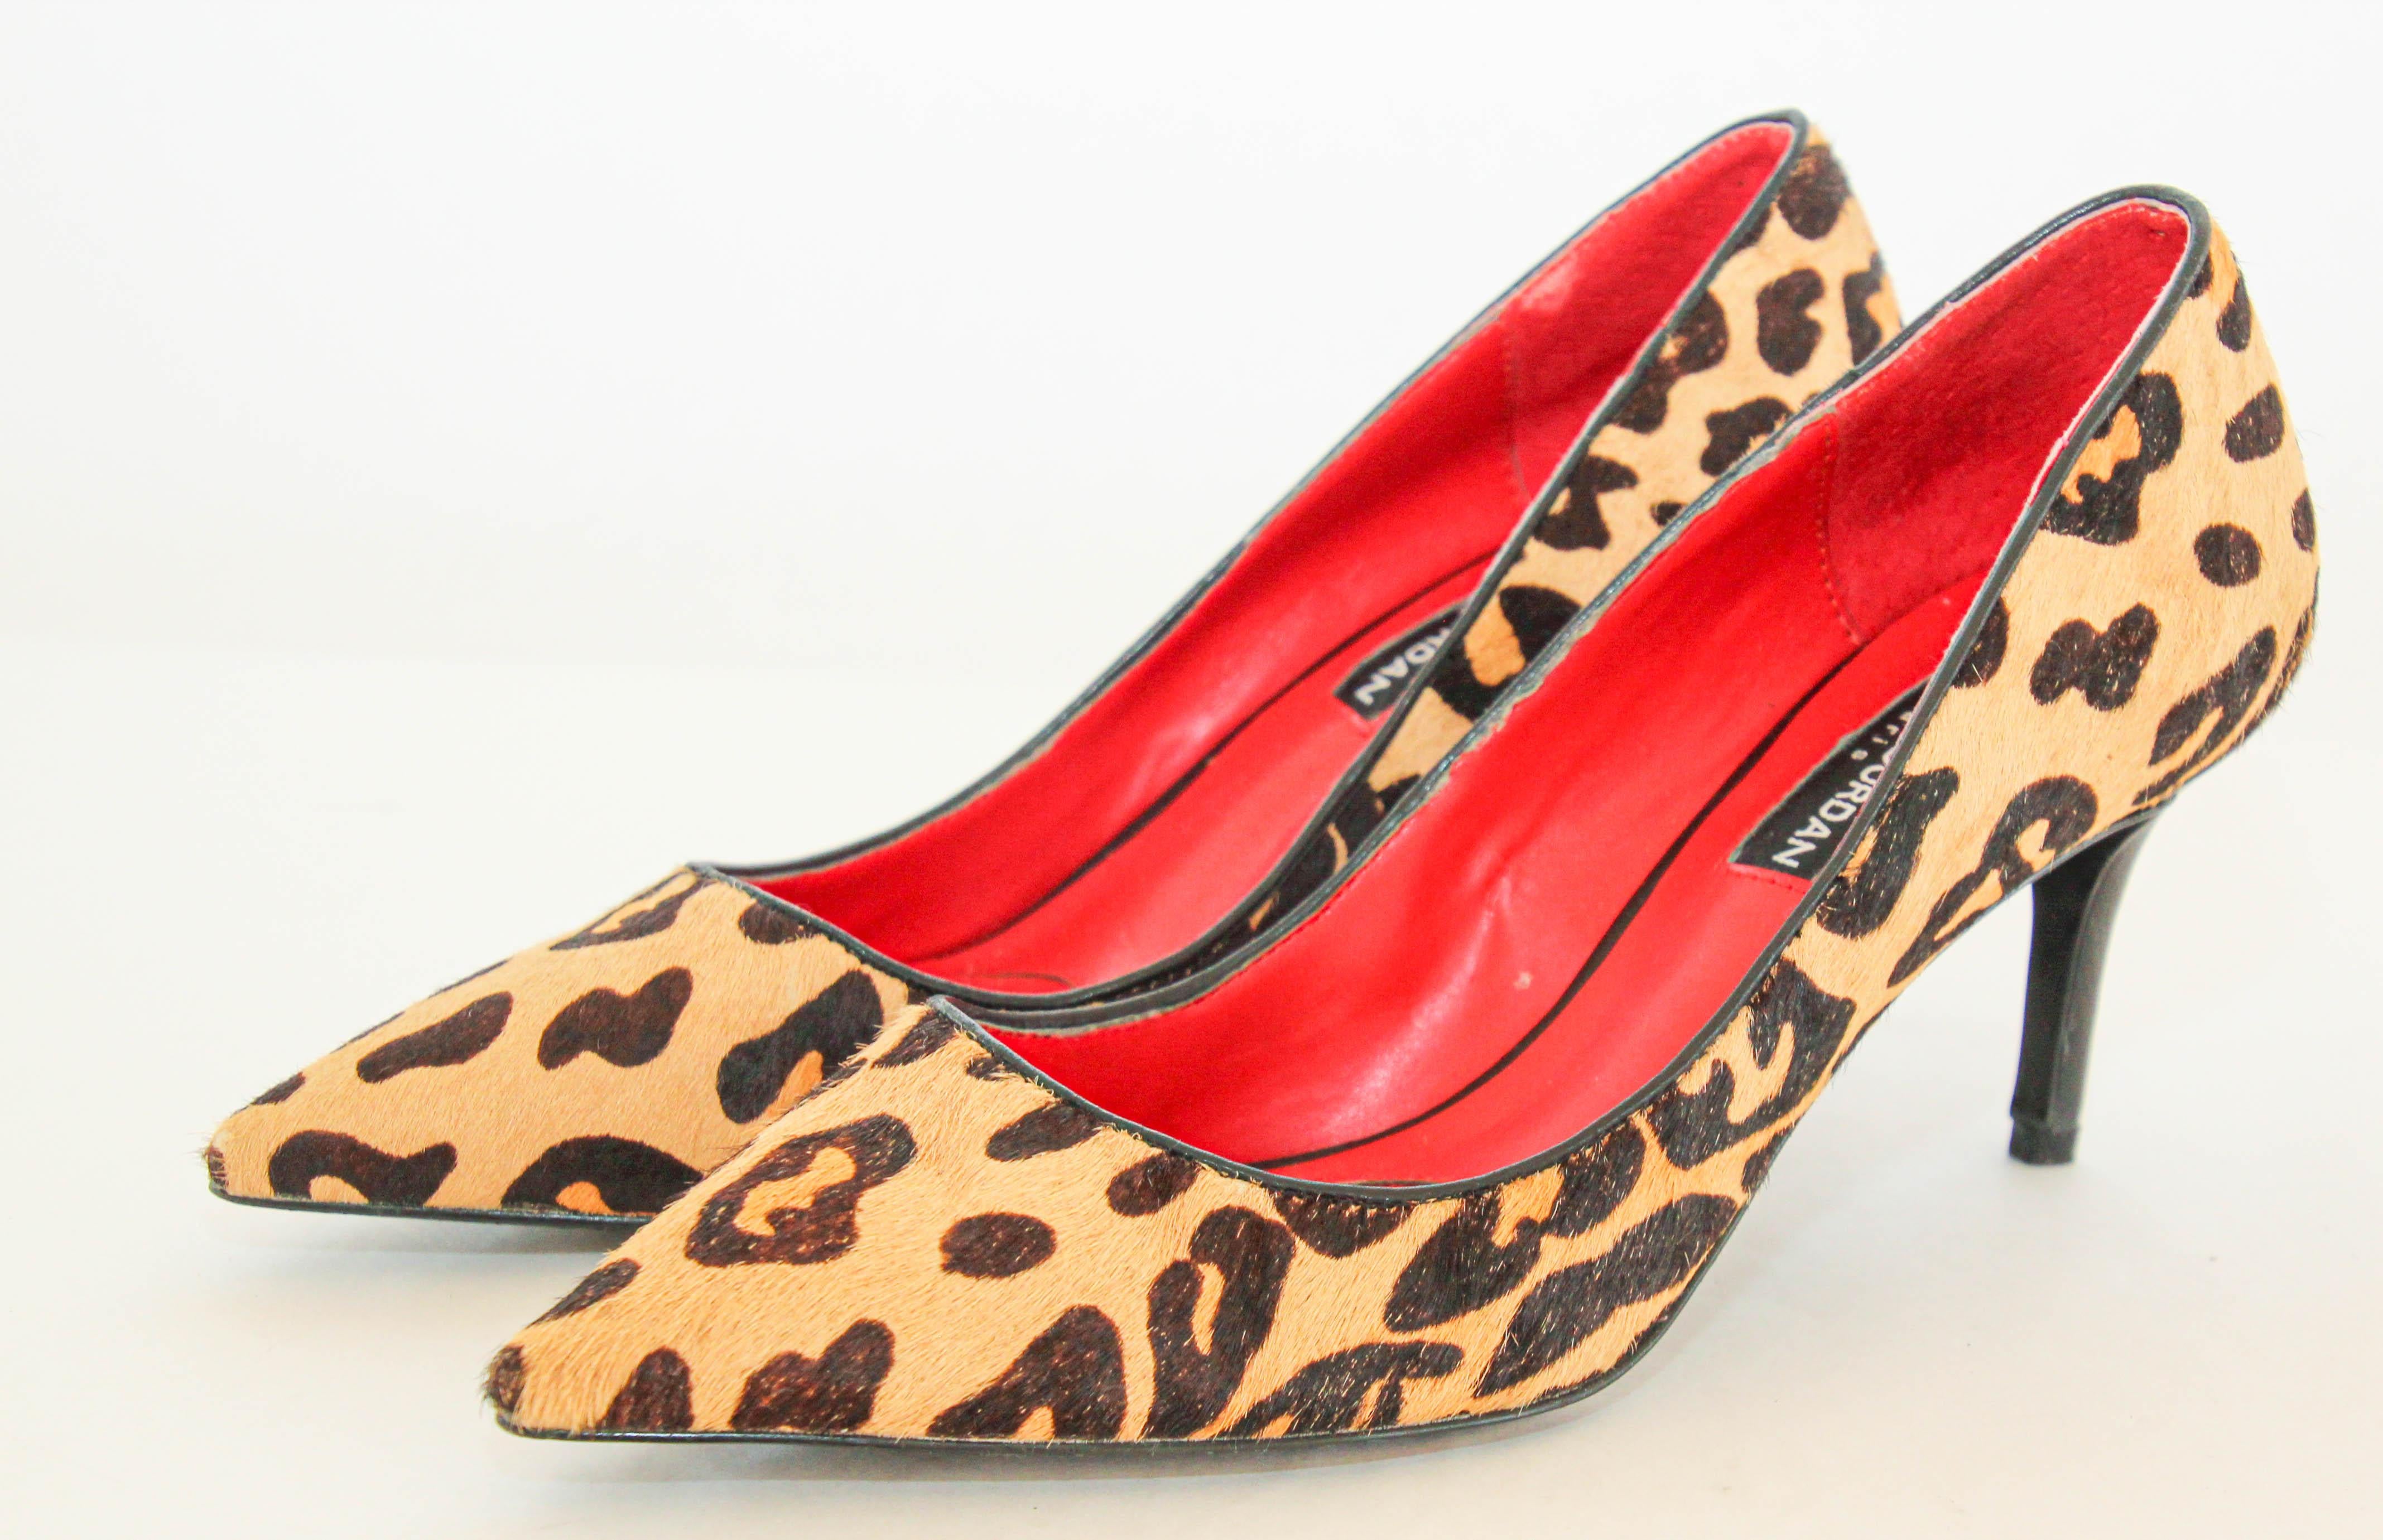 Charles Jourdan Paris Leopard Print Pony Hair heels Pumps Size US 6 EU 36 In Good Condition For Sale In North Hollywood, CA